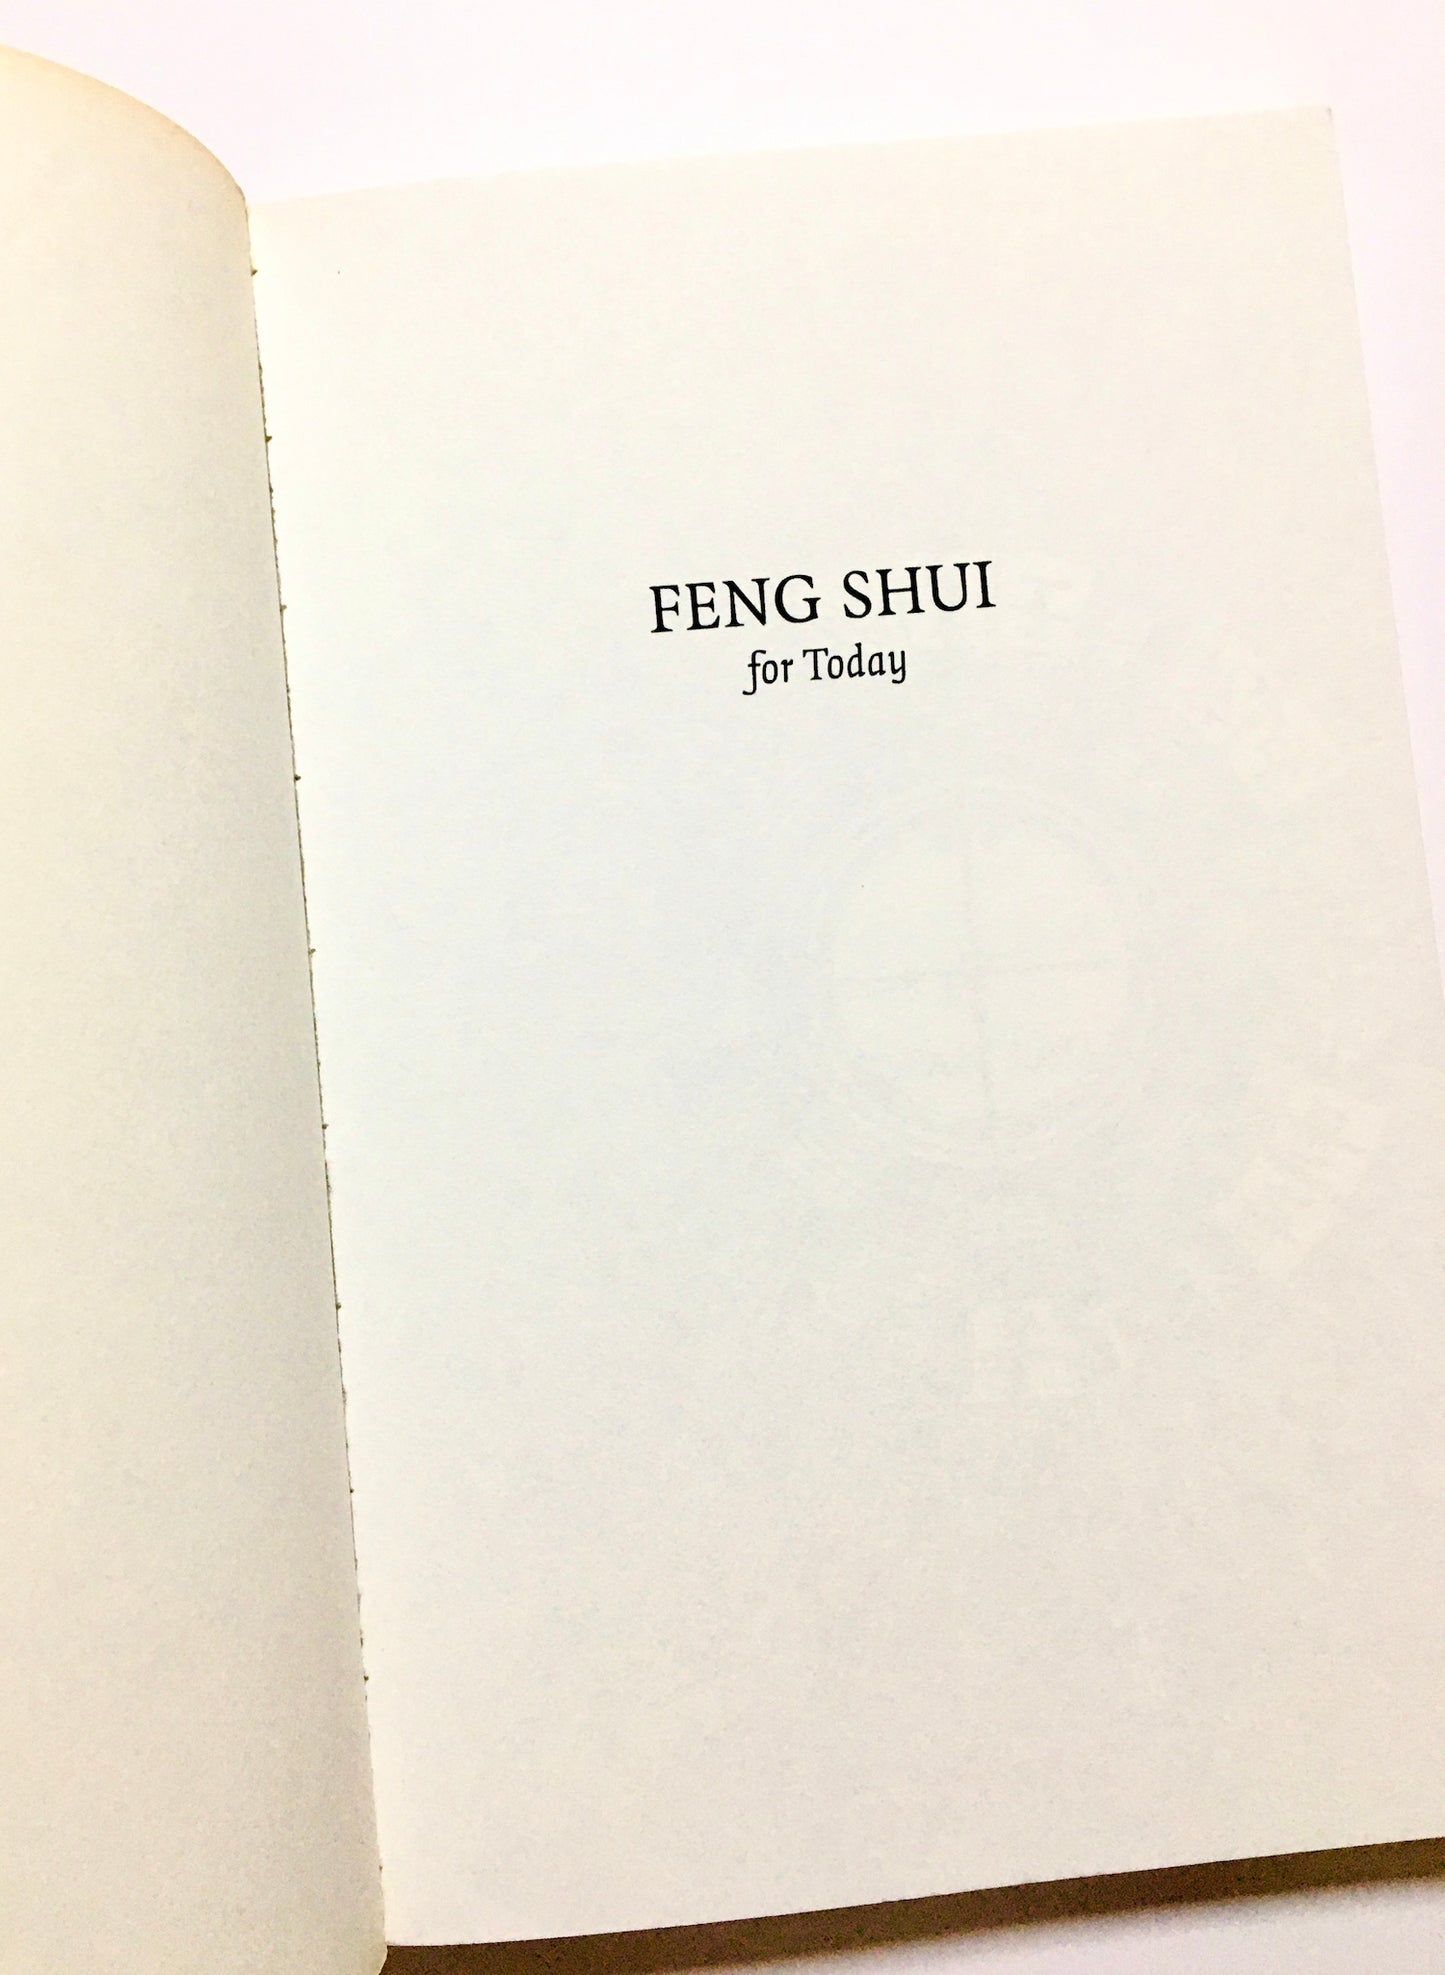 The Elements of Feng Shui